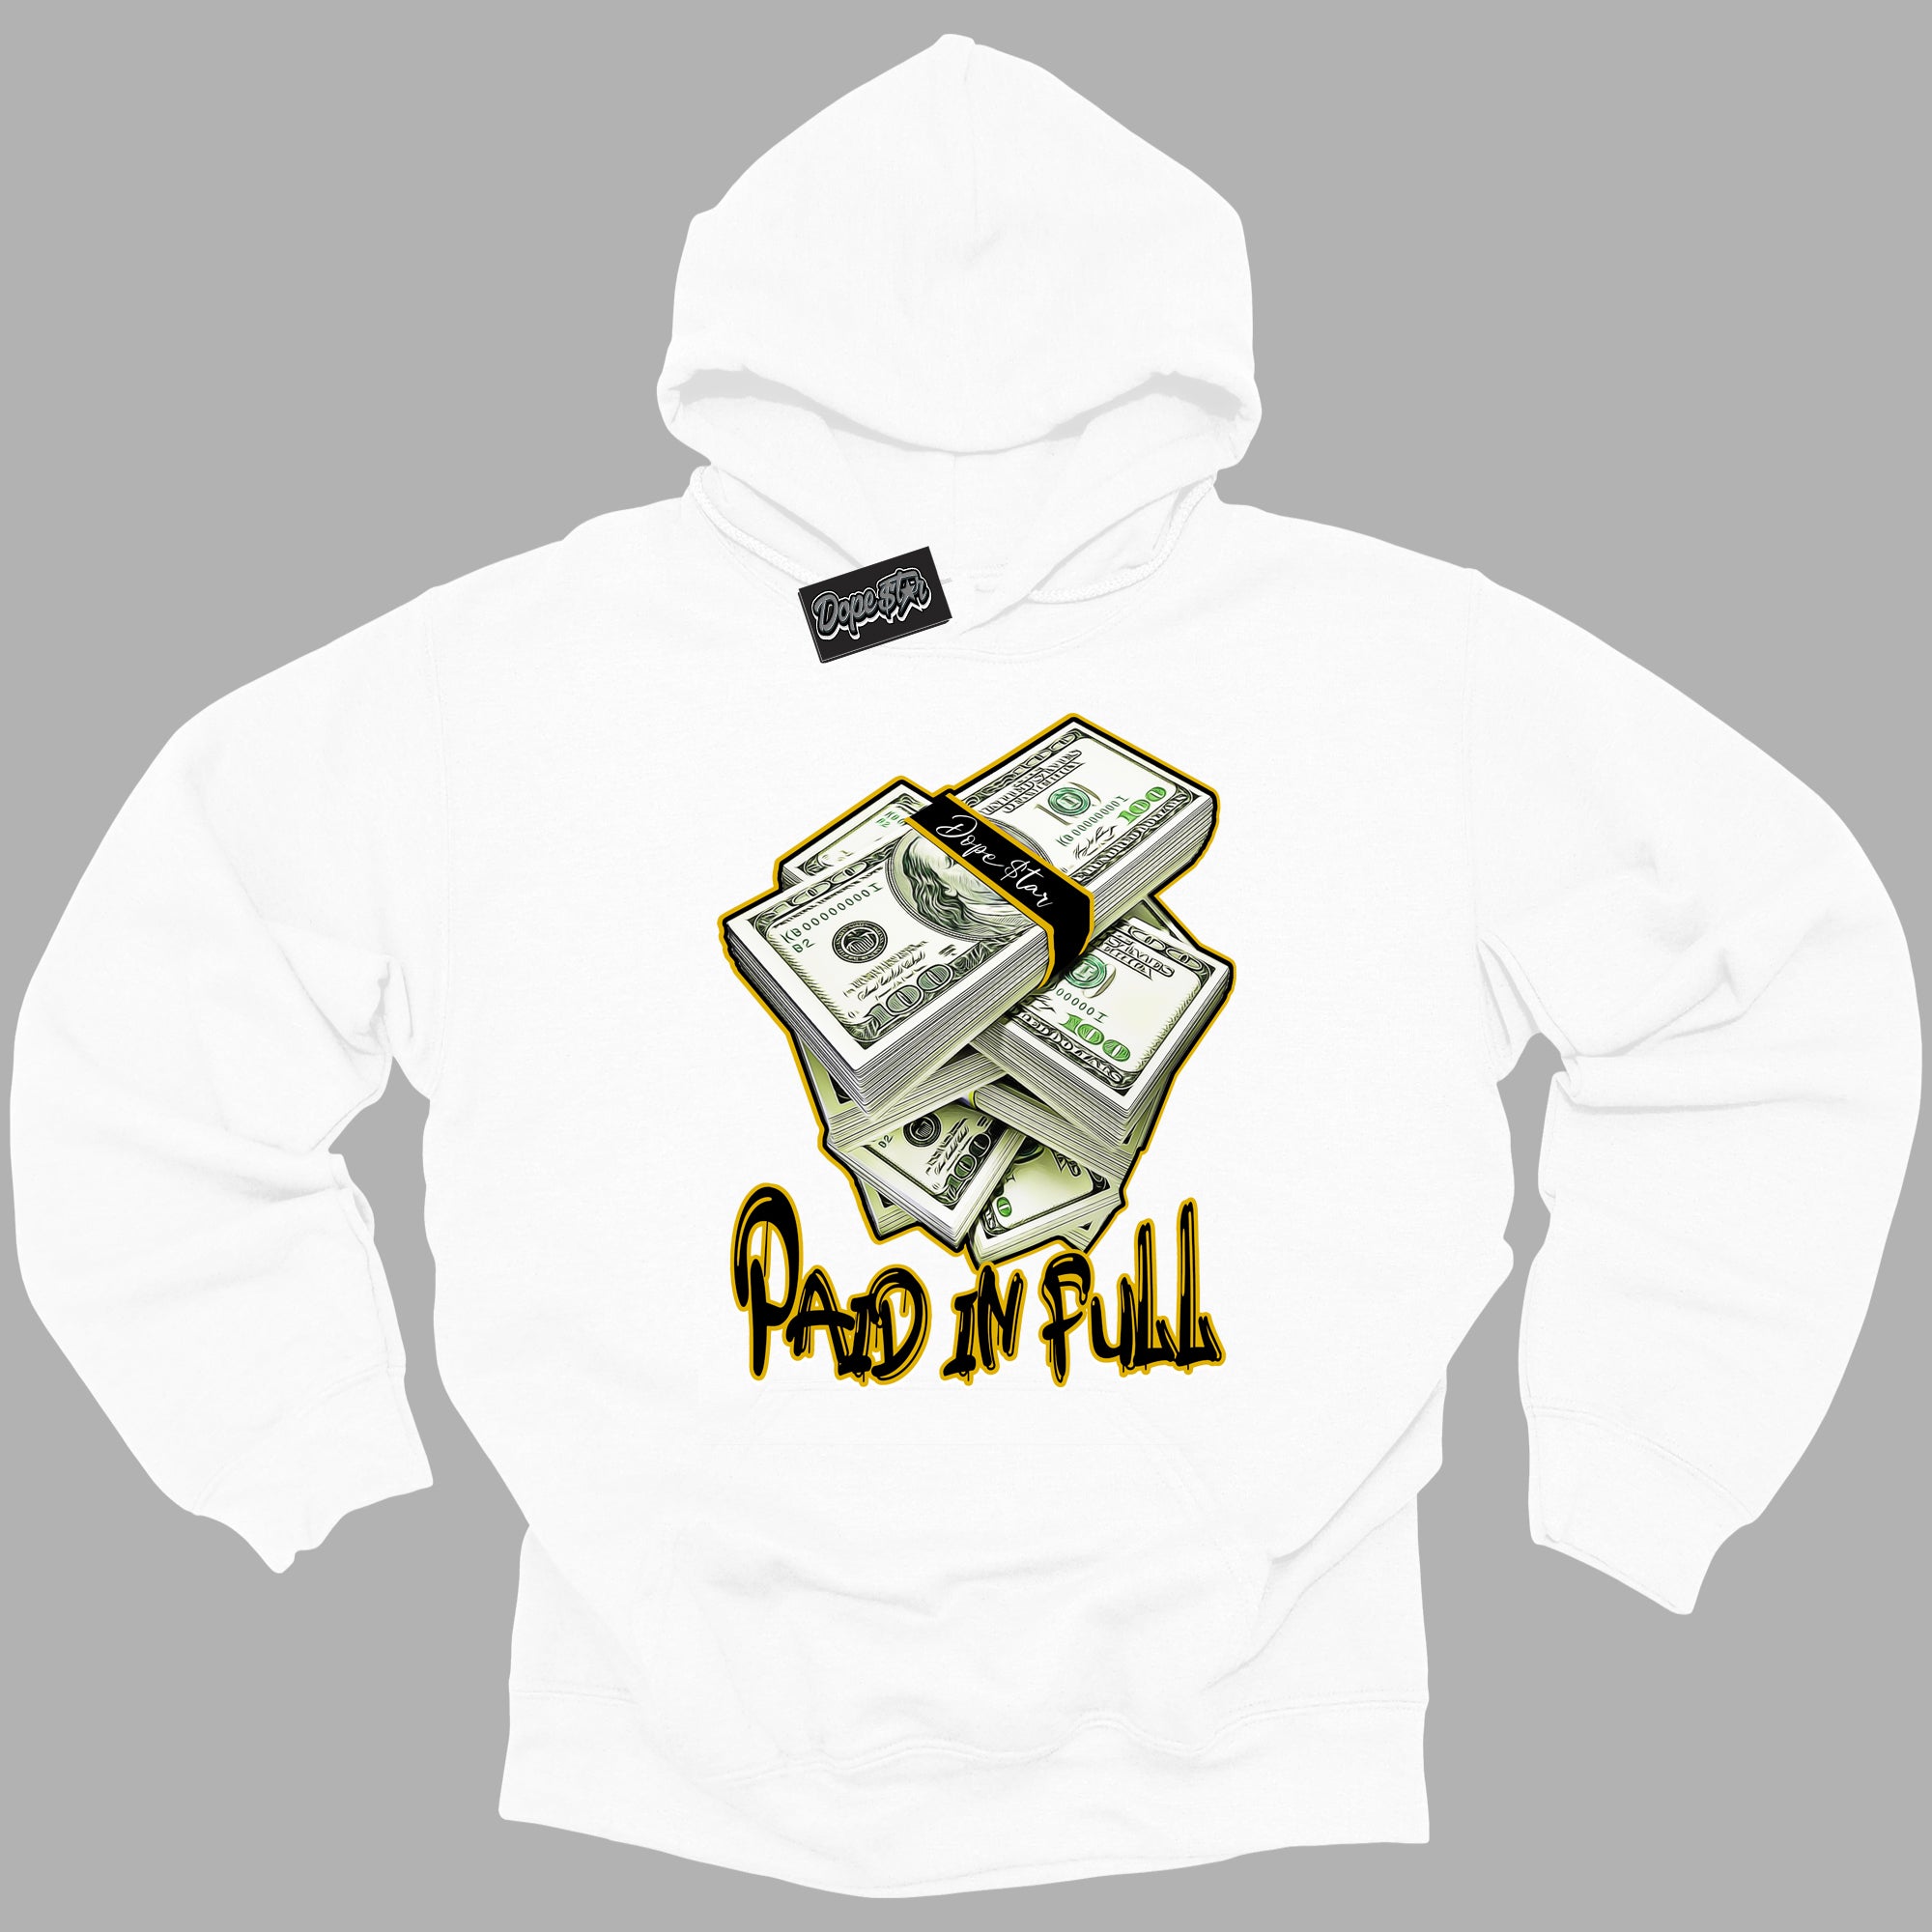 Cool White Hoodie with “ Paid In Full ”  design that Perfectly Matches Yellow Ochre 6s Sneakers.